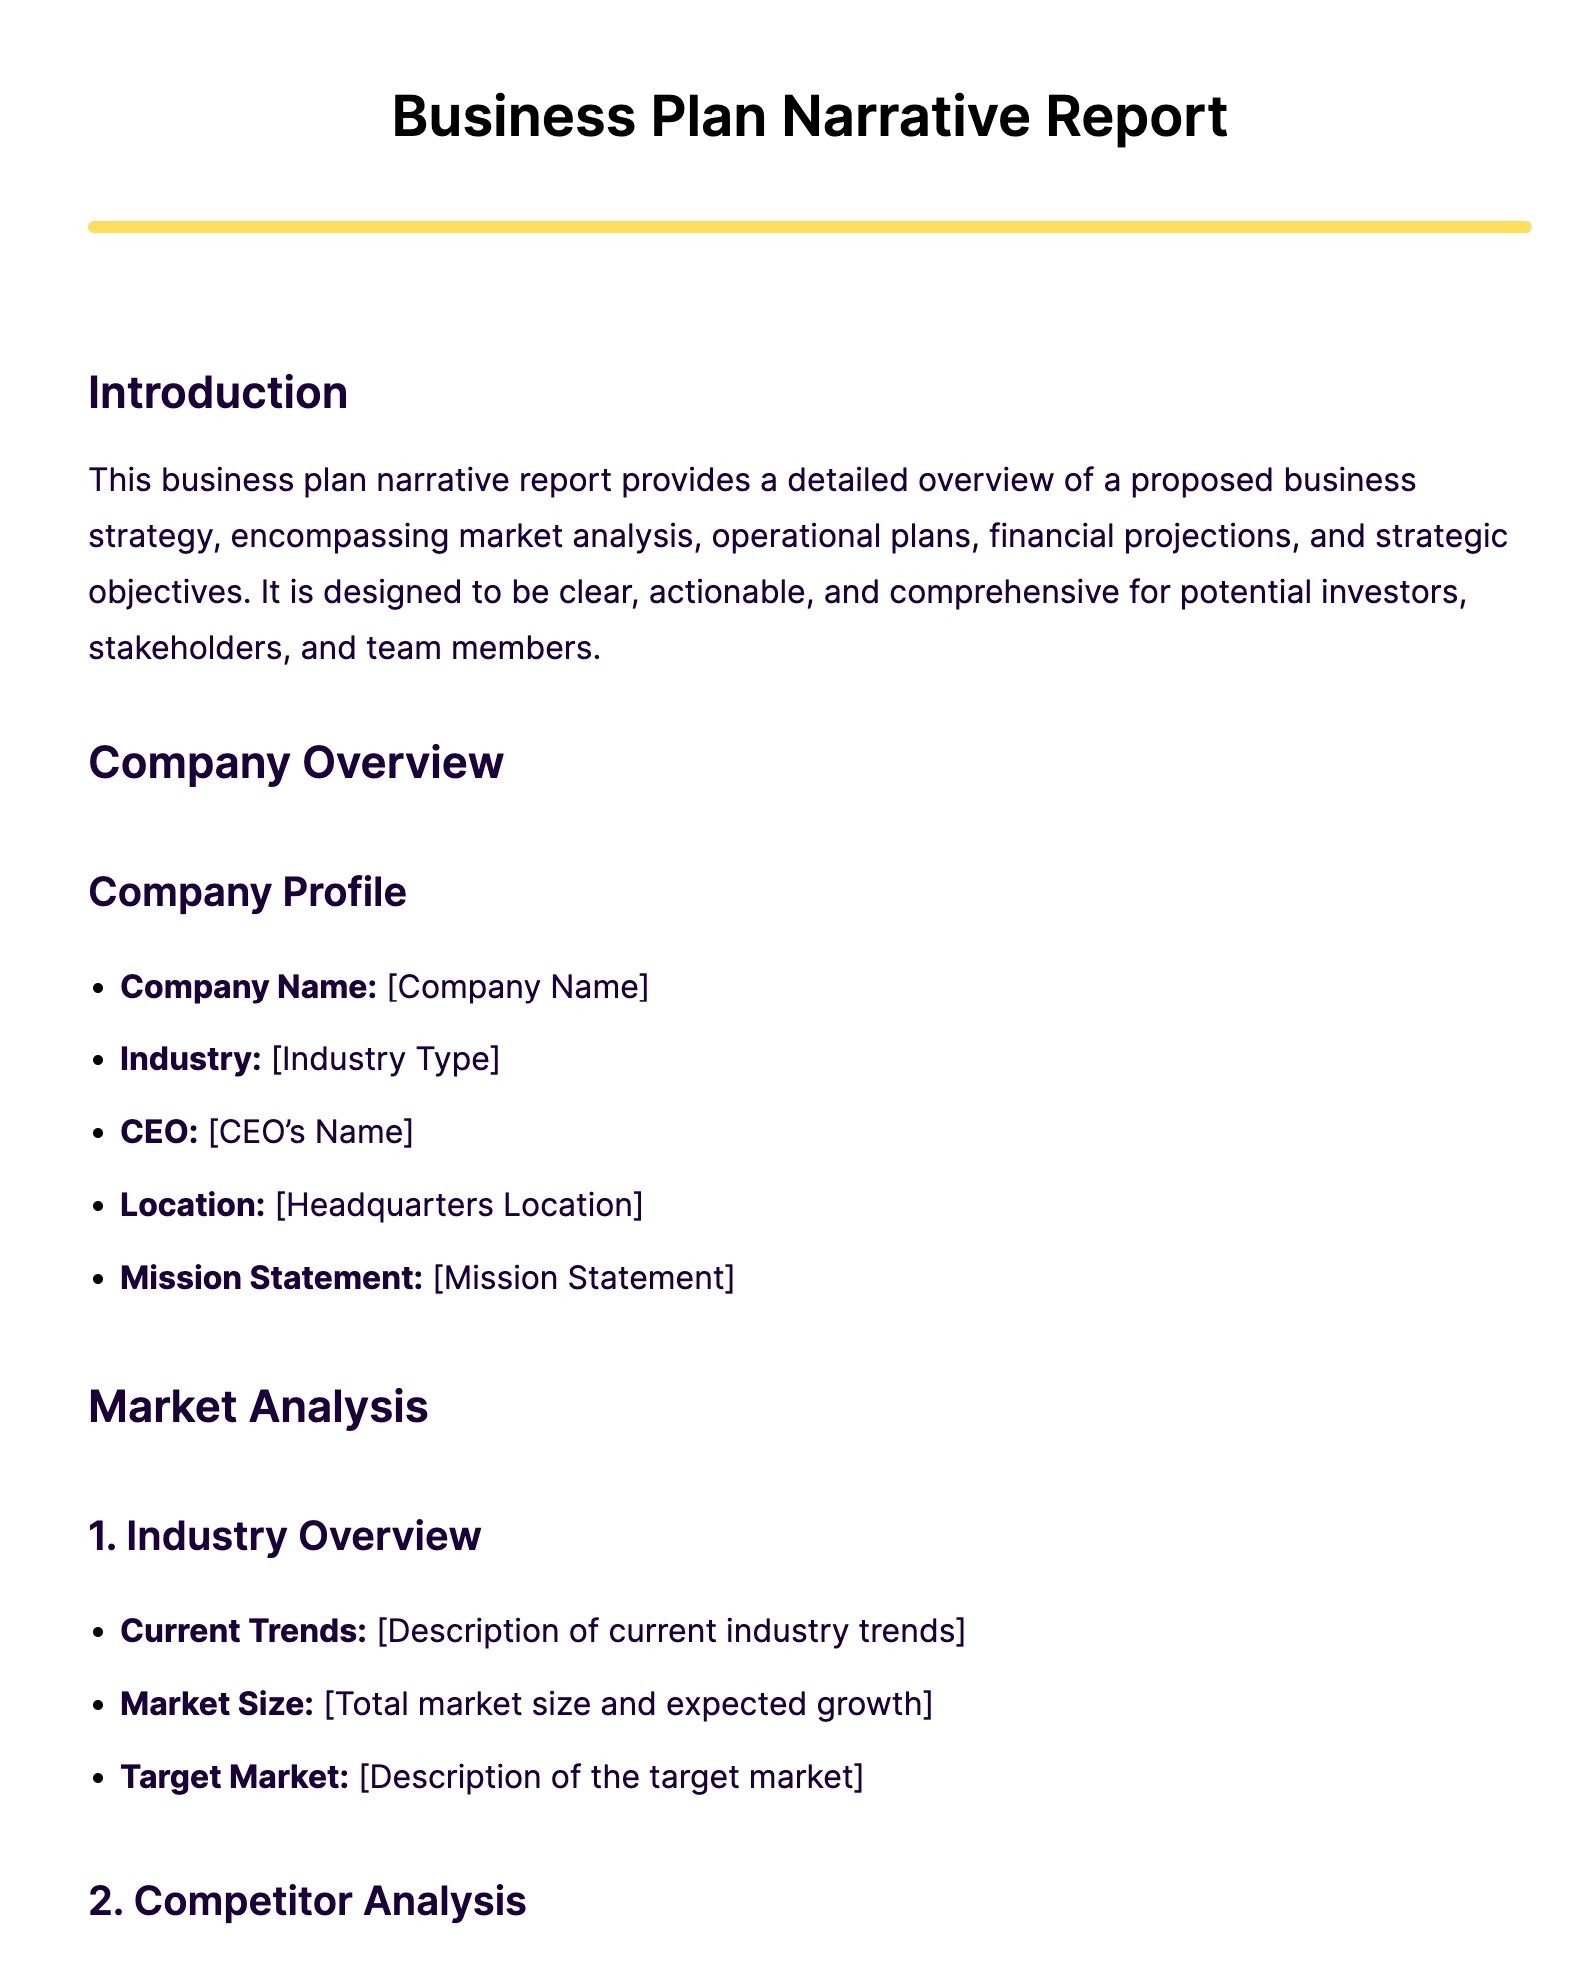 Business Plan Narrative Report Example